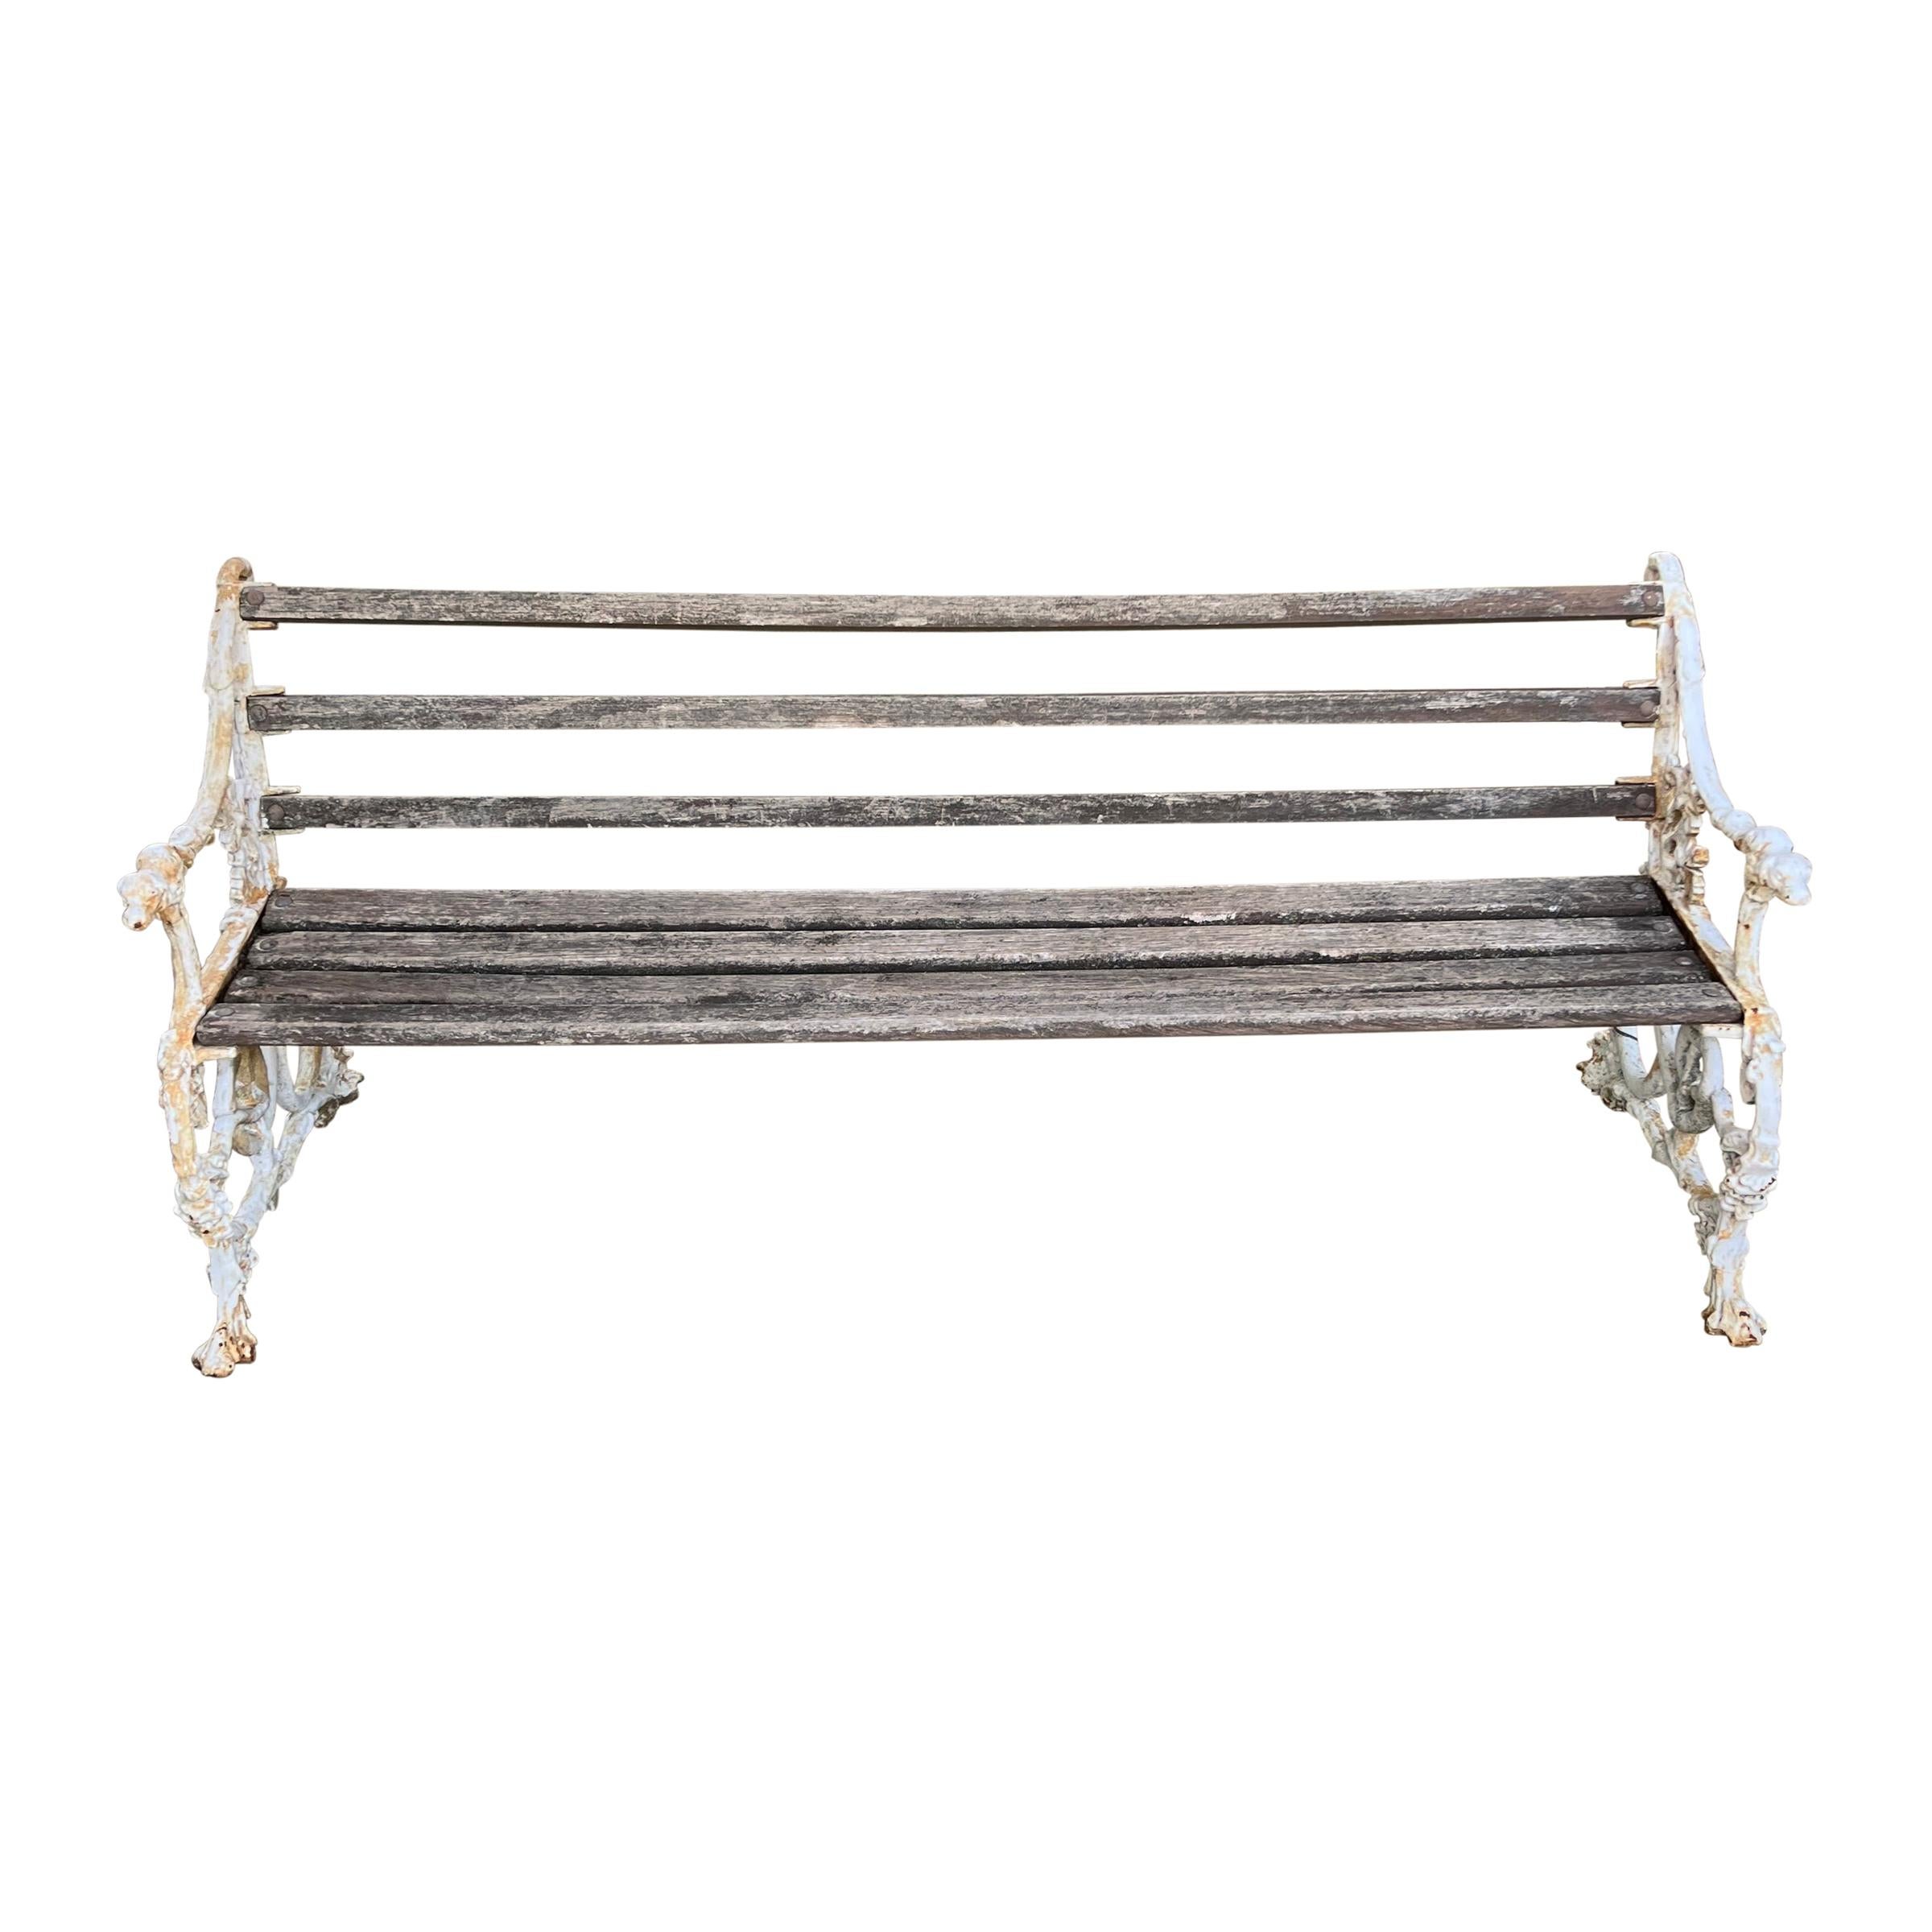 Iron 19th Century English 'Dog and Snake' Garden Bench For Sale